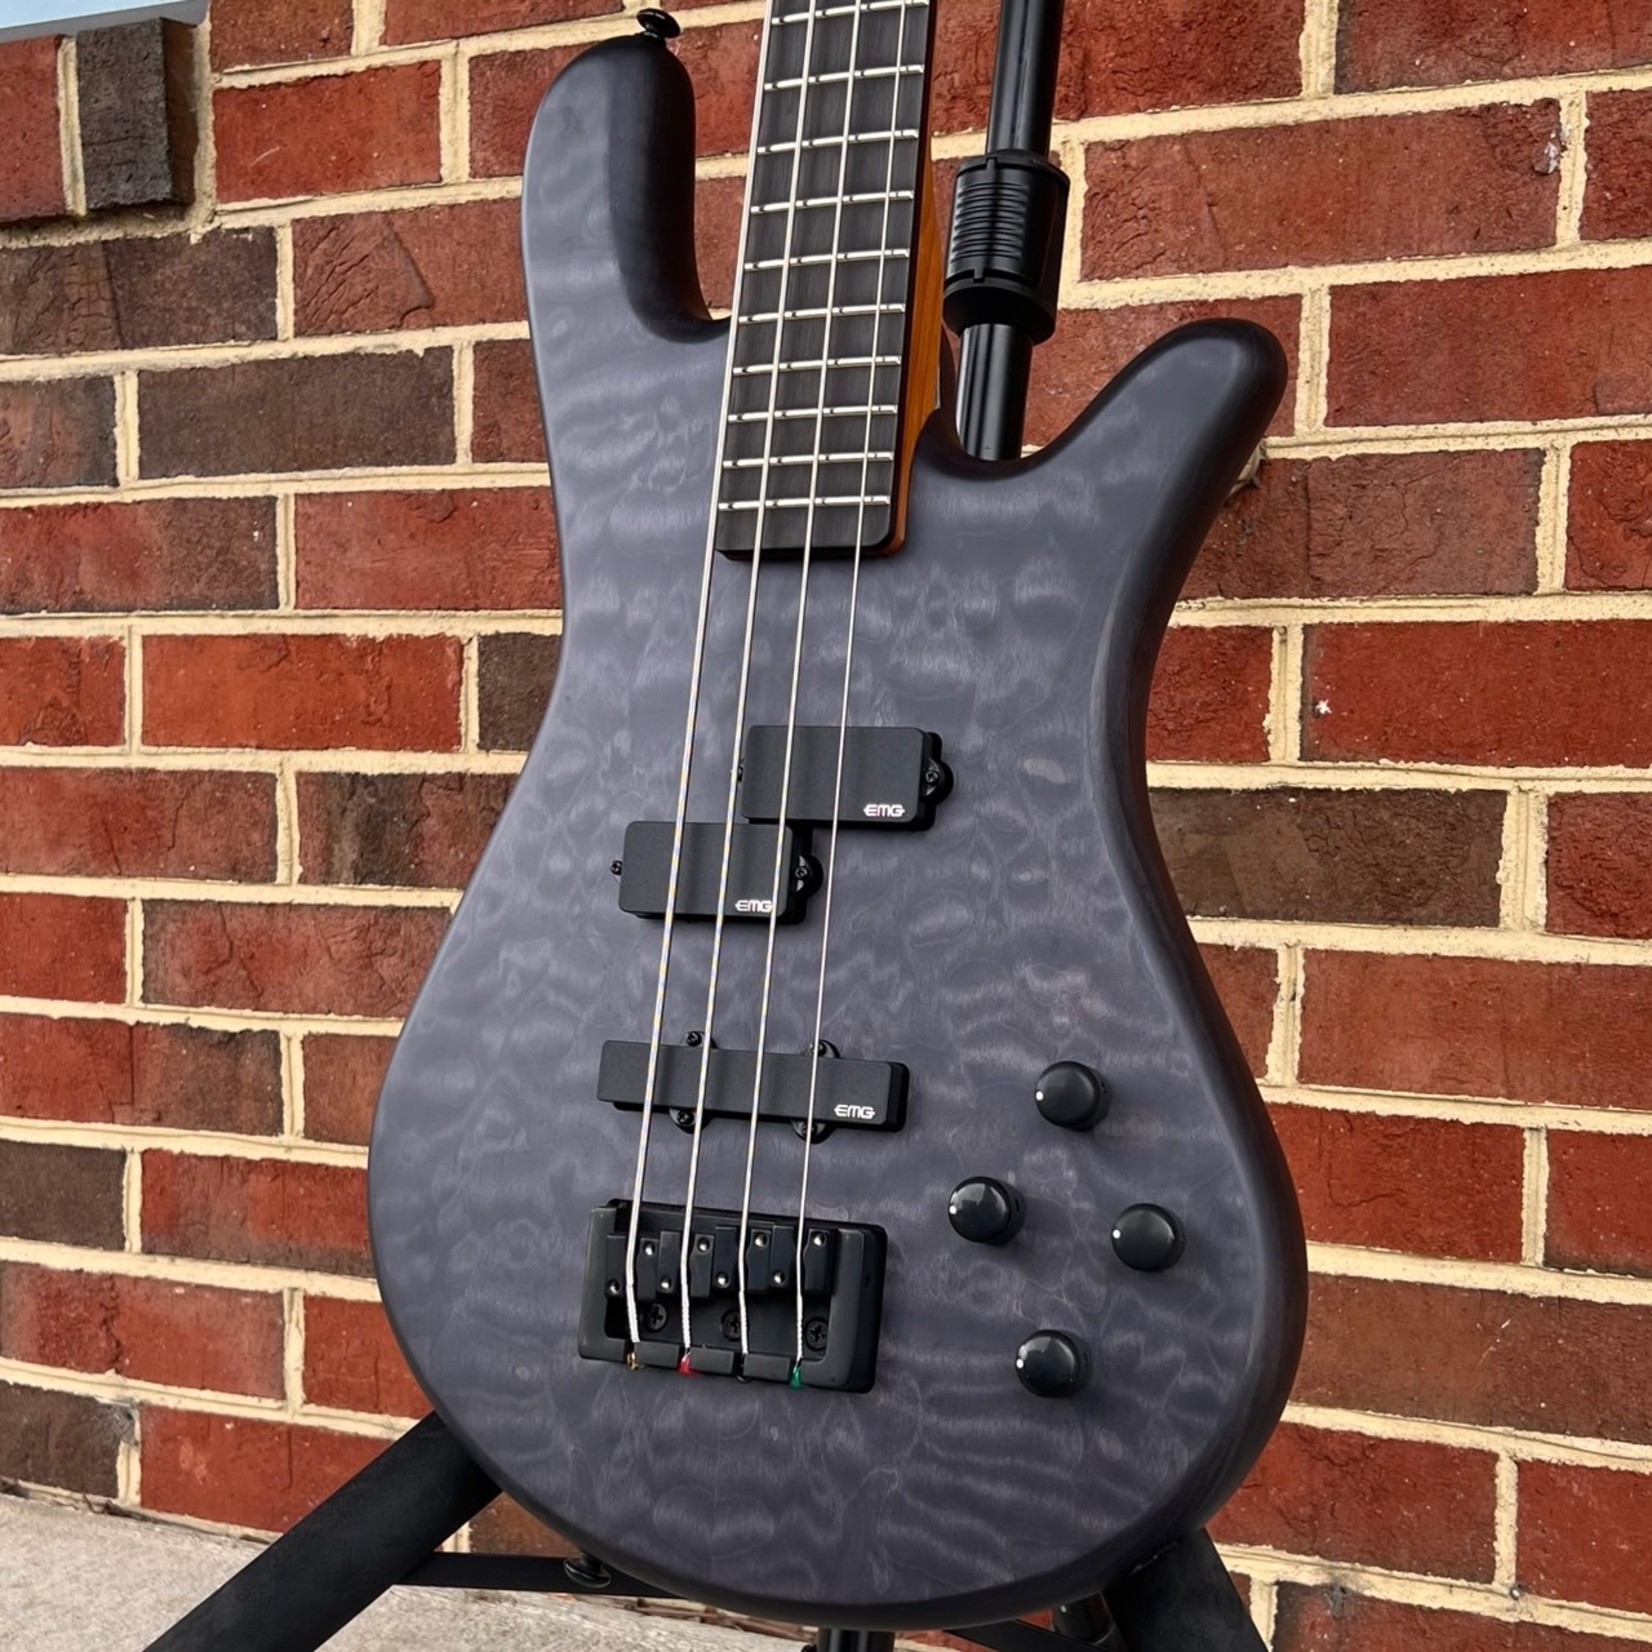 Spector Spector NS Pulse II 4-String, Black Stain Matte, Quilted Maple Top, Swamp Ash Body, Roasted Maple Neck, Macassar Ebony Fretboard, SN# W211449